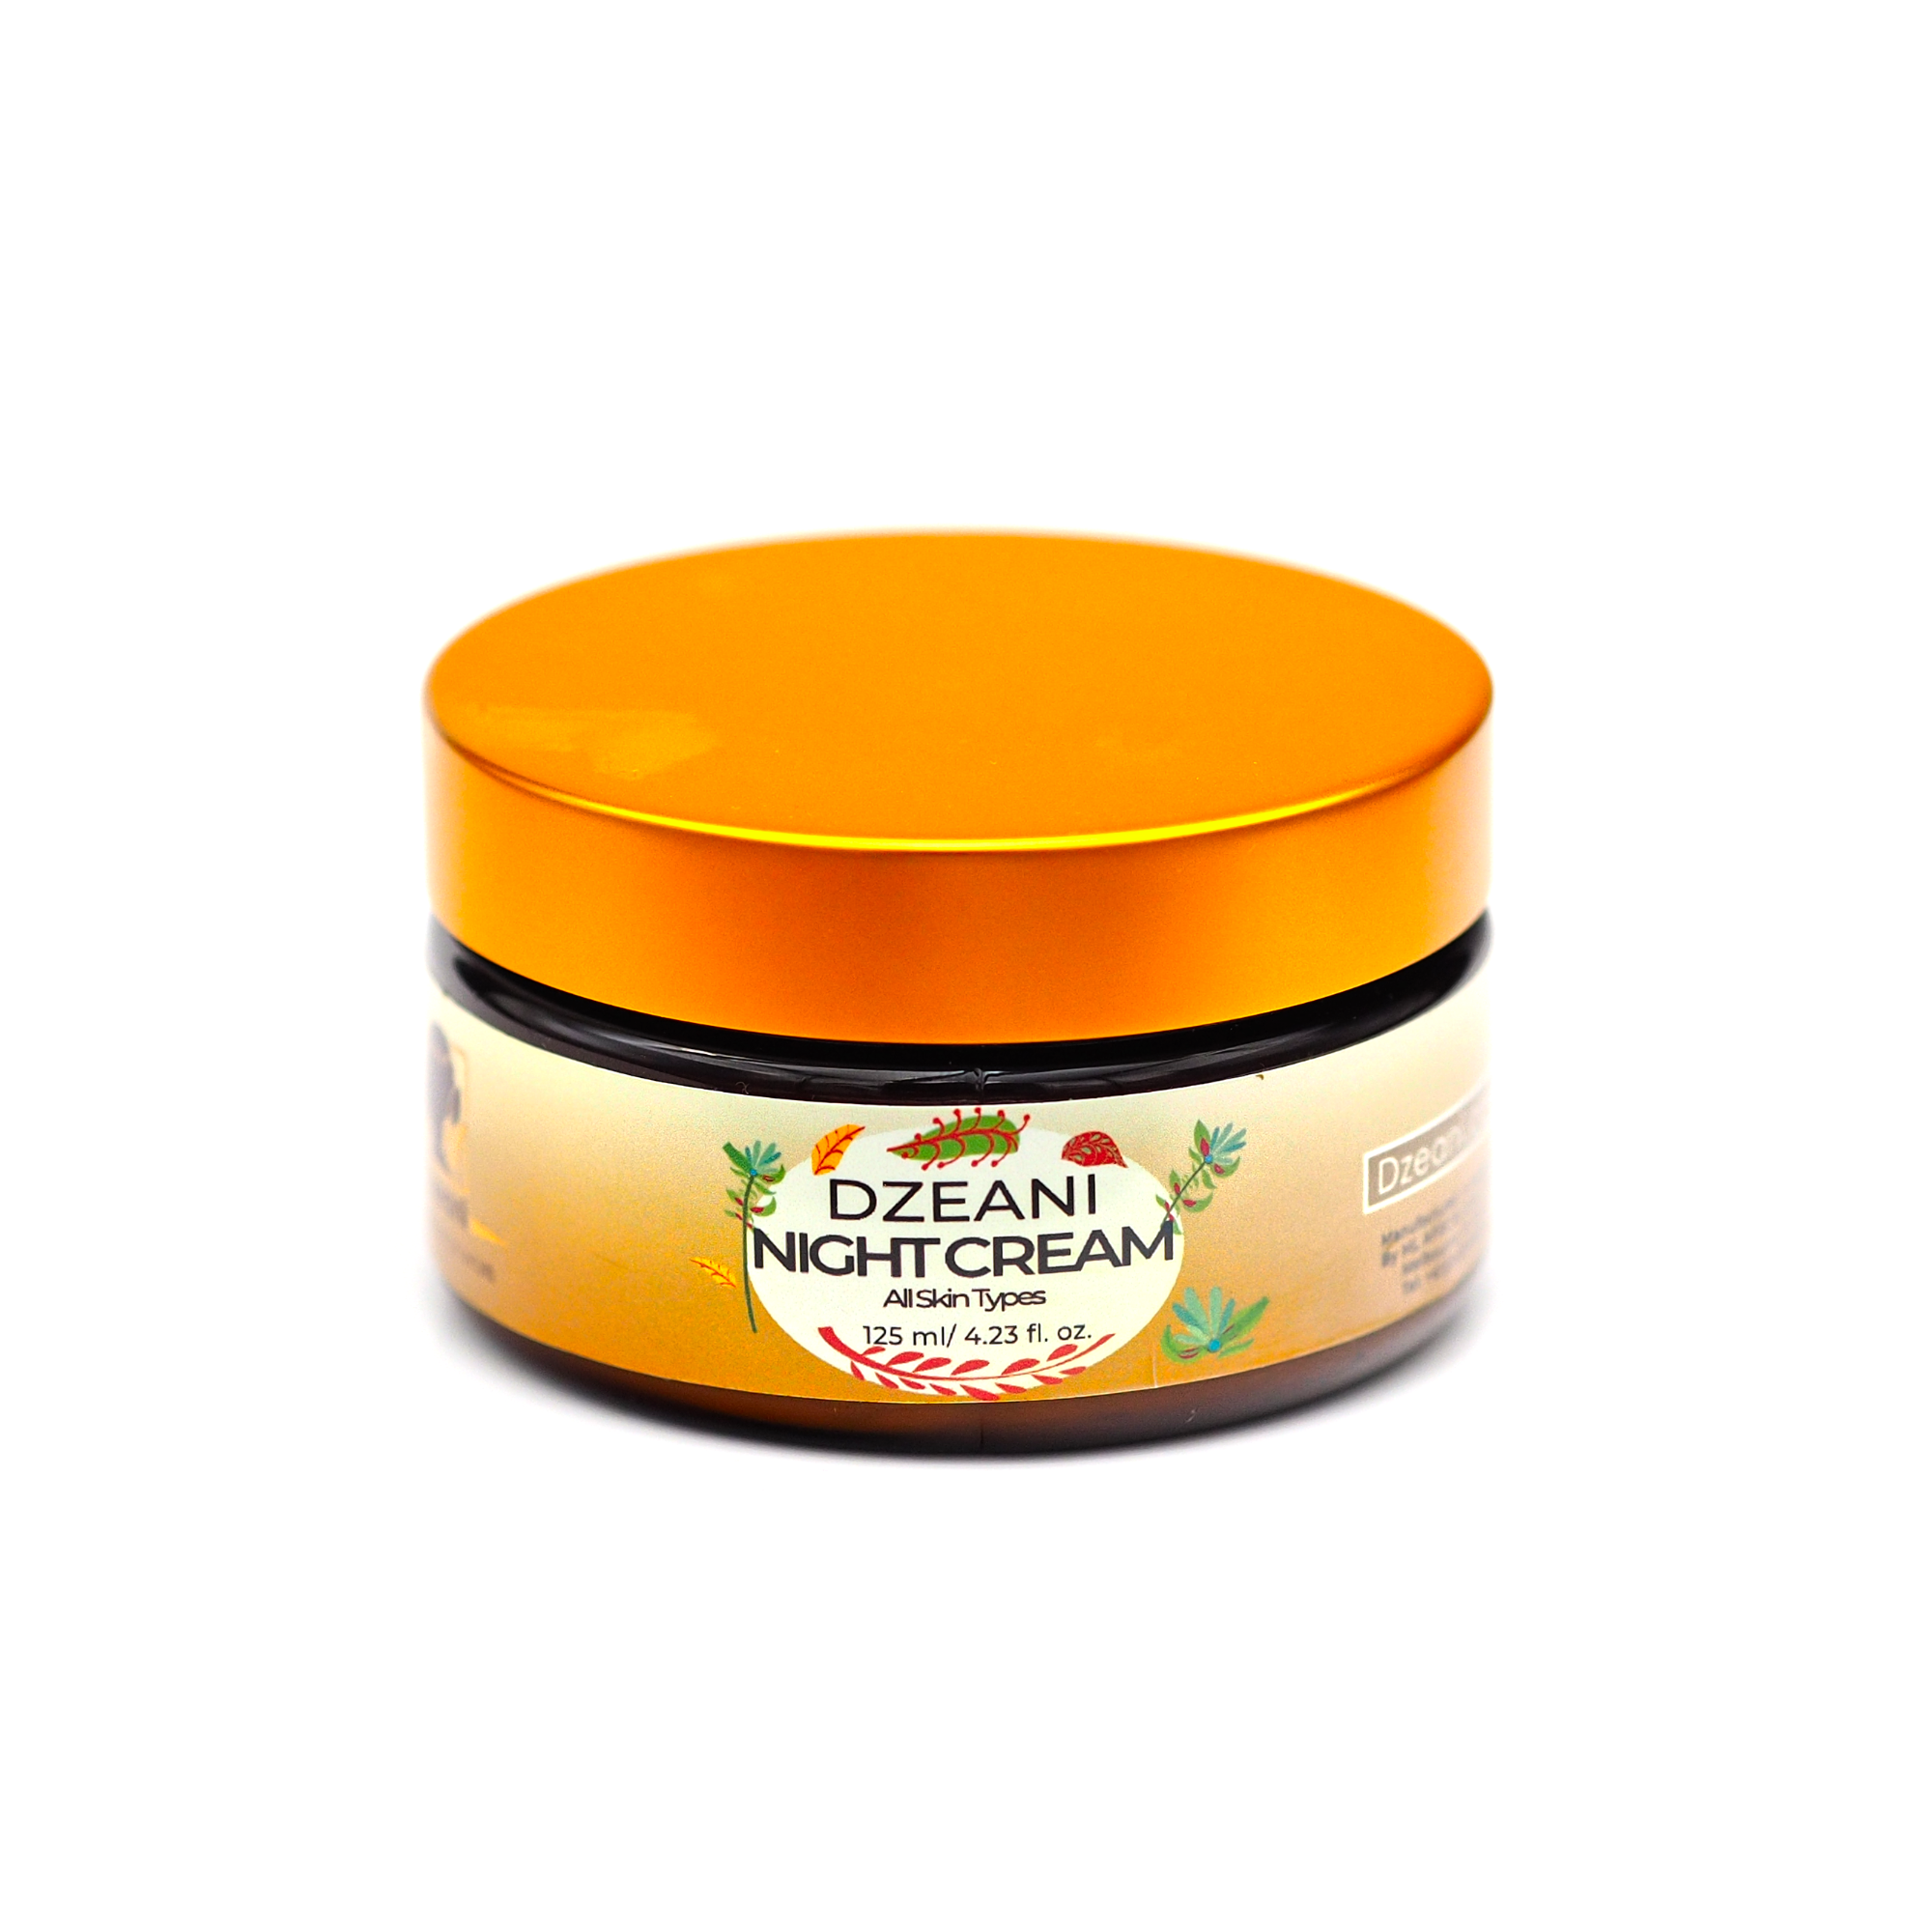 Dzeani Night Cream provides long-lasting moisture without leaving a greasy feel. It will keep your skin properly hydrated during the night